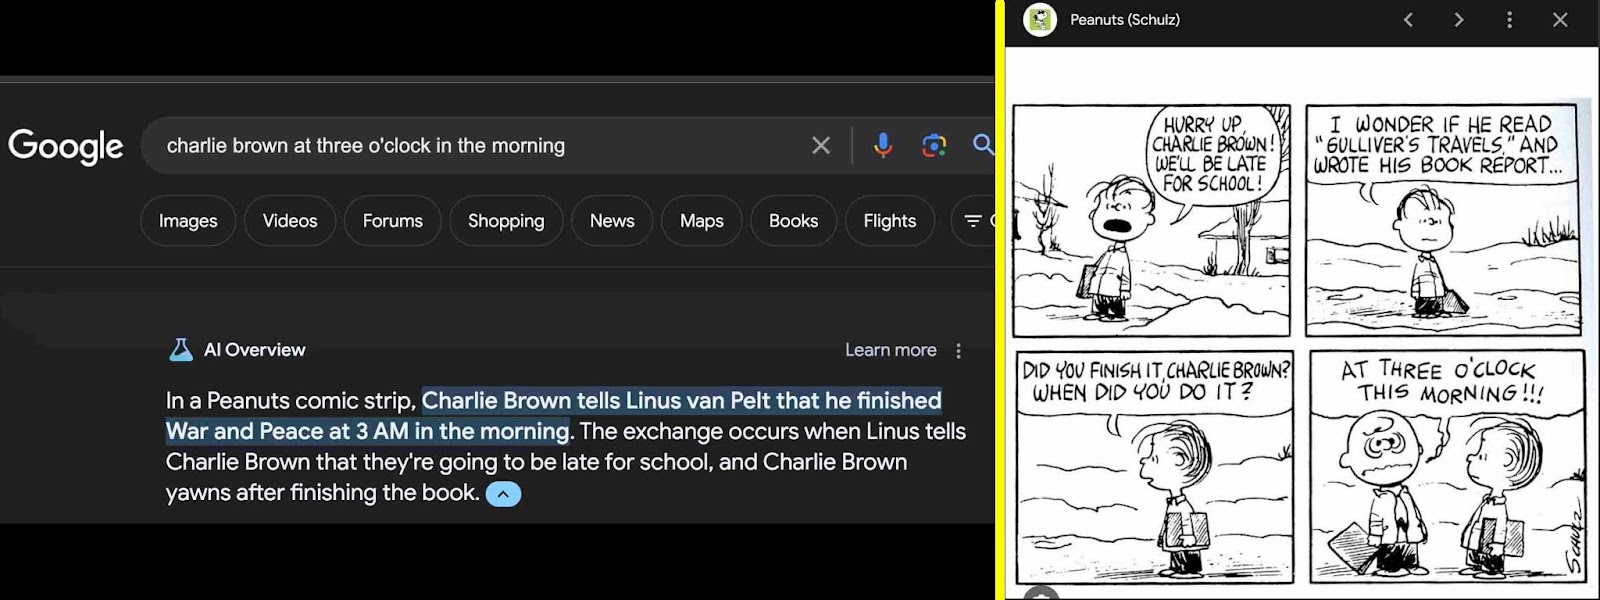 [ALT/CAPTION: I don’t want to exactly re-type the actual words for this bad result for my Google search “charlie brown at three o’clock in the morning” because then I am feeding the GARBAGE-IN side of Google’s A.I., so take my word for it that War and Peace is in there, which is incorrect! It’s Gulliver’s Travels, right there in the comic! Here’s the comic: Linus, standing outside in a winter scene: HURRY UP, CHARLIE BROWN! WE’LL BE LATE FOR SCHOOL! Next panel, Linus is waiting and says to themself, I WONDER IF HE READ “GULLIVER’S TRAVELS,” AND WROTE HIS BOOK REPORT...” Next panel, Charlie Brown is out of the frame, but approaching, and Linus says DID YOU FINISH IT, CHARLIE BROWN? WHEN DID YOU DO IT? Charlie Brown appears in the last panel, bags under the eyes, looking rumpled, and says in wavy lettering, AT THREE O’CLOCK THIS MORNING!!!]